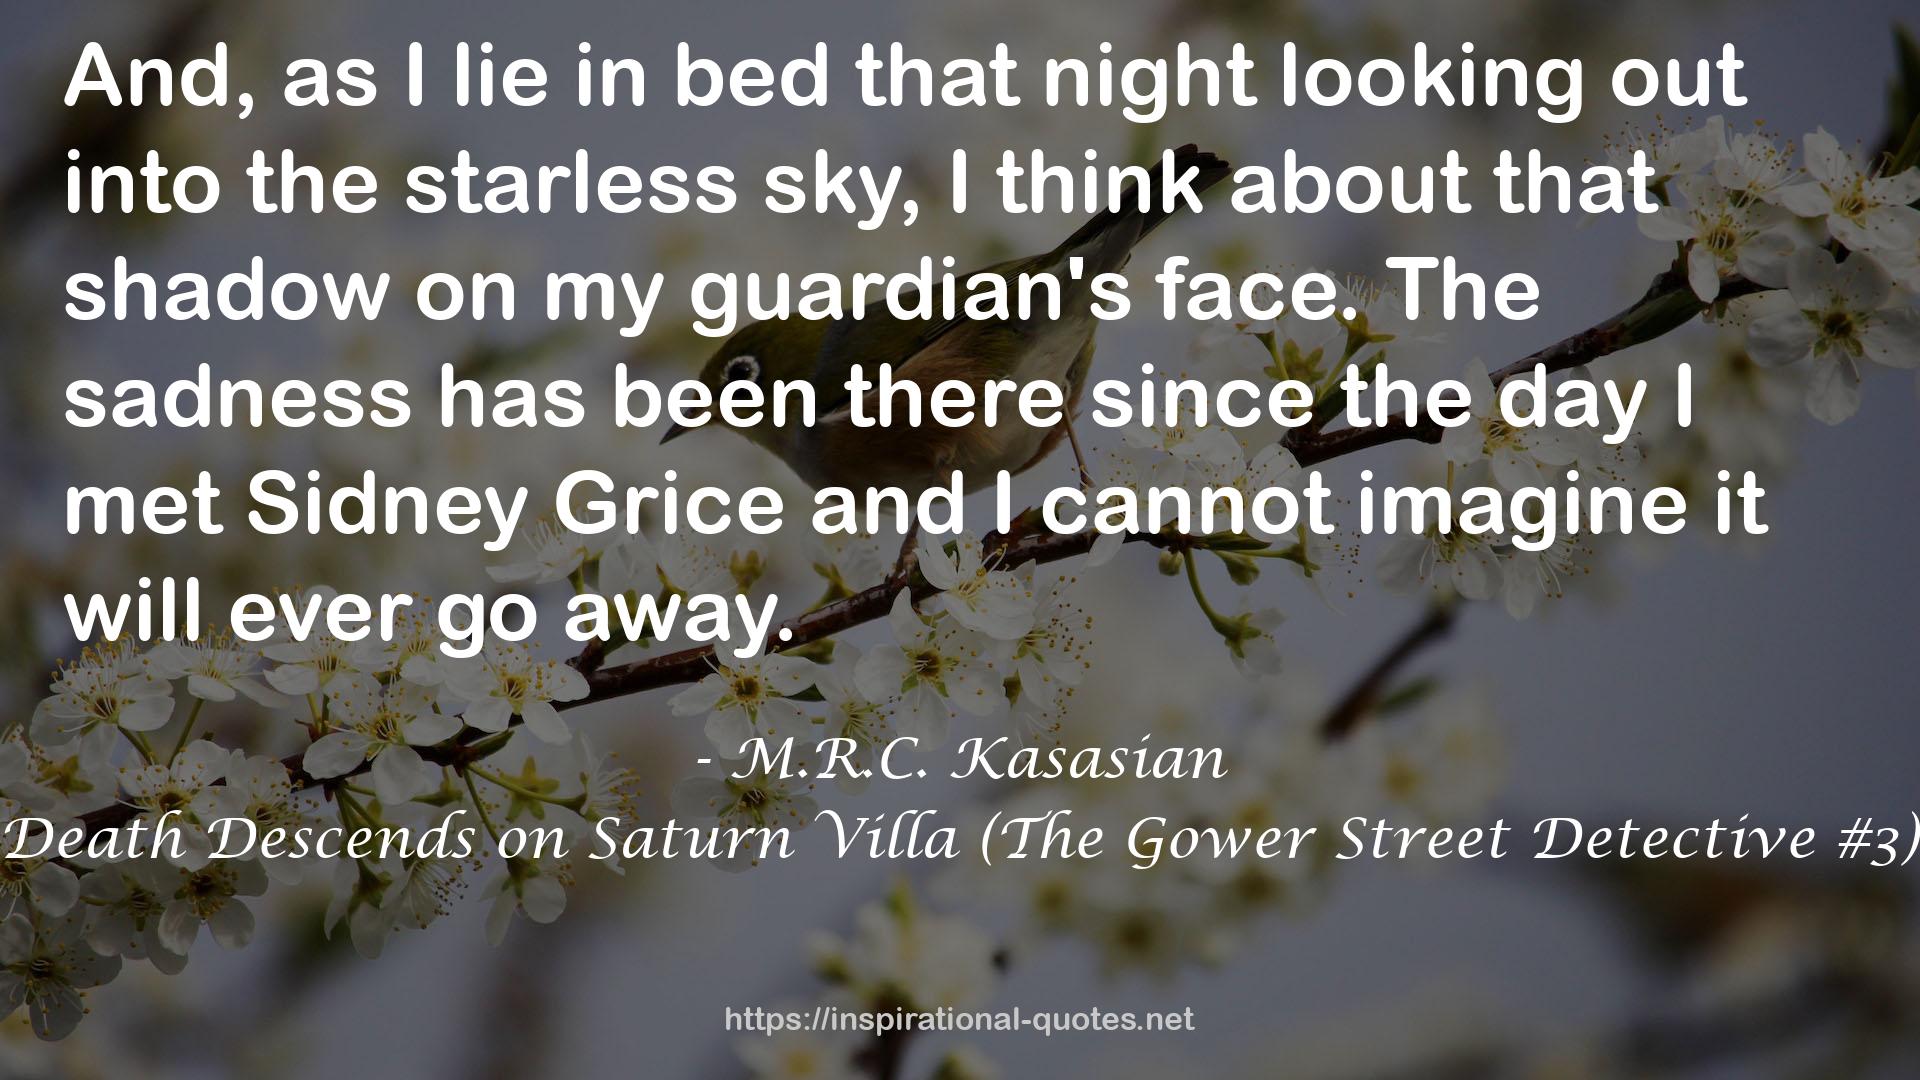 Death Descends on Saturn Villa (The Gower Street Detective #3) QUOTES